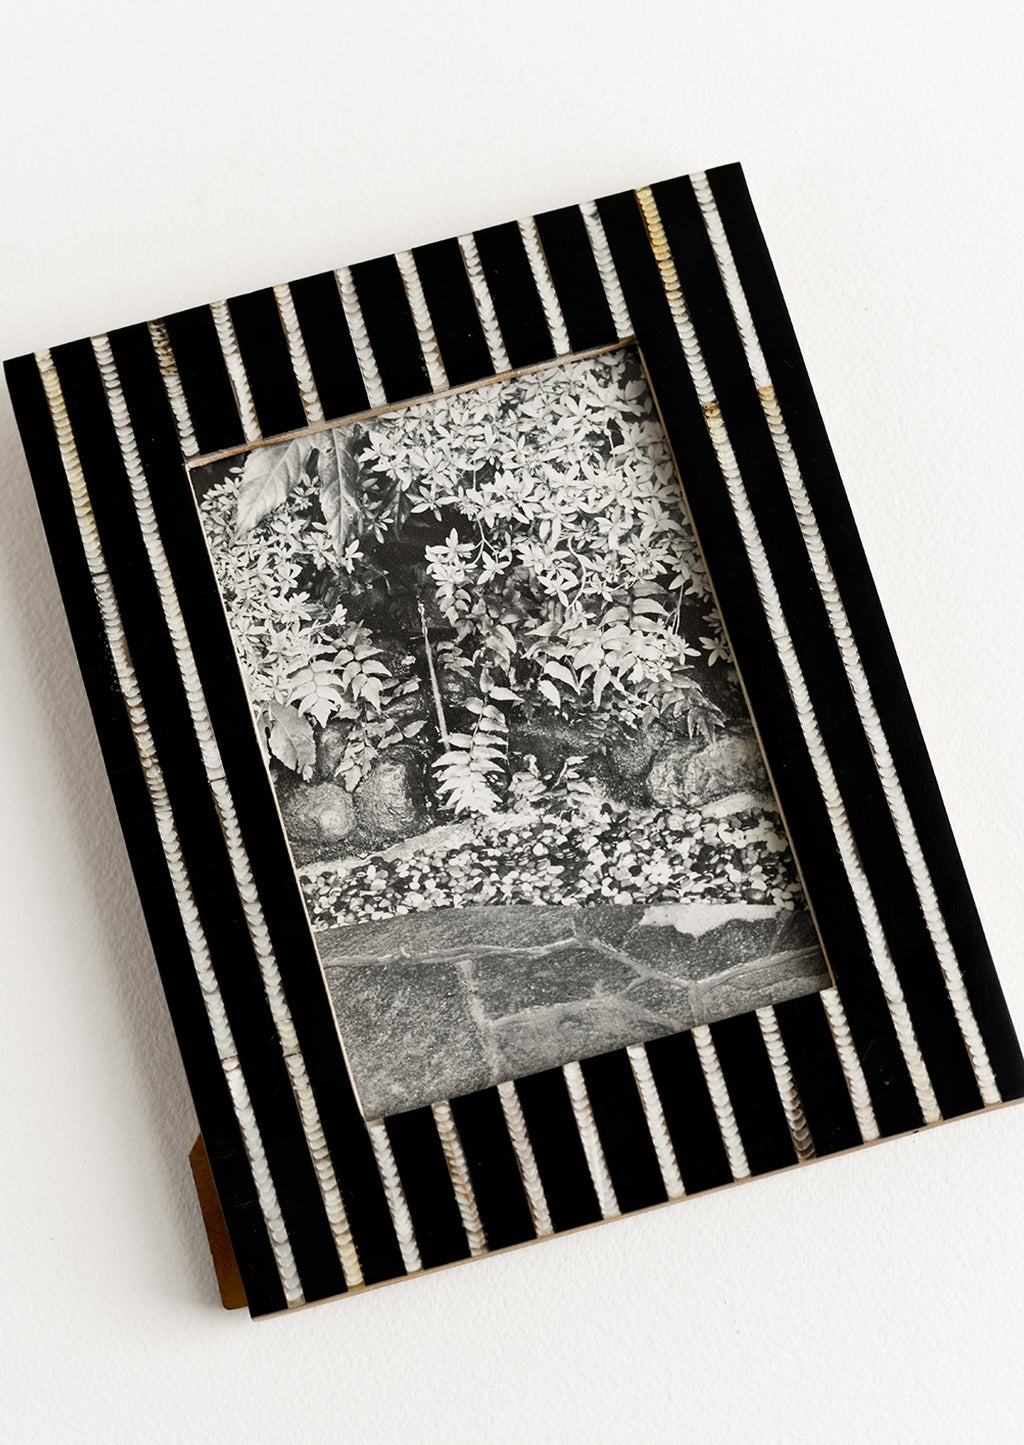 2: A black and white striped picture frame.A black and white striped picture frame.